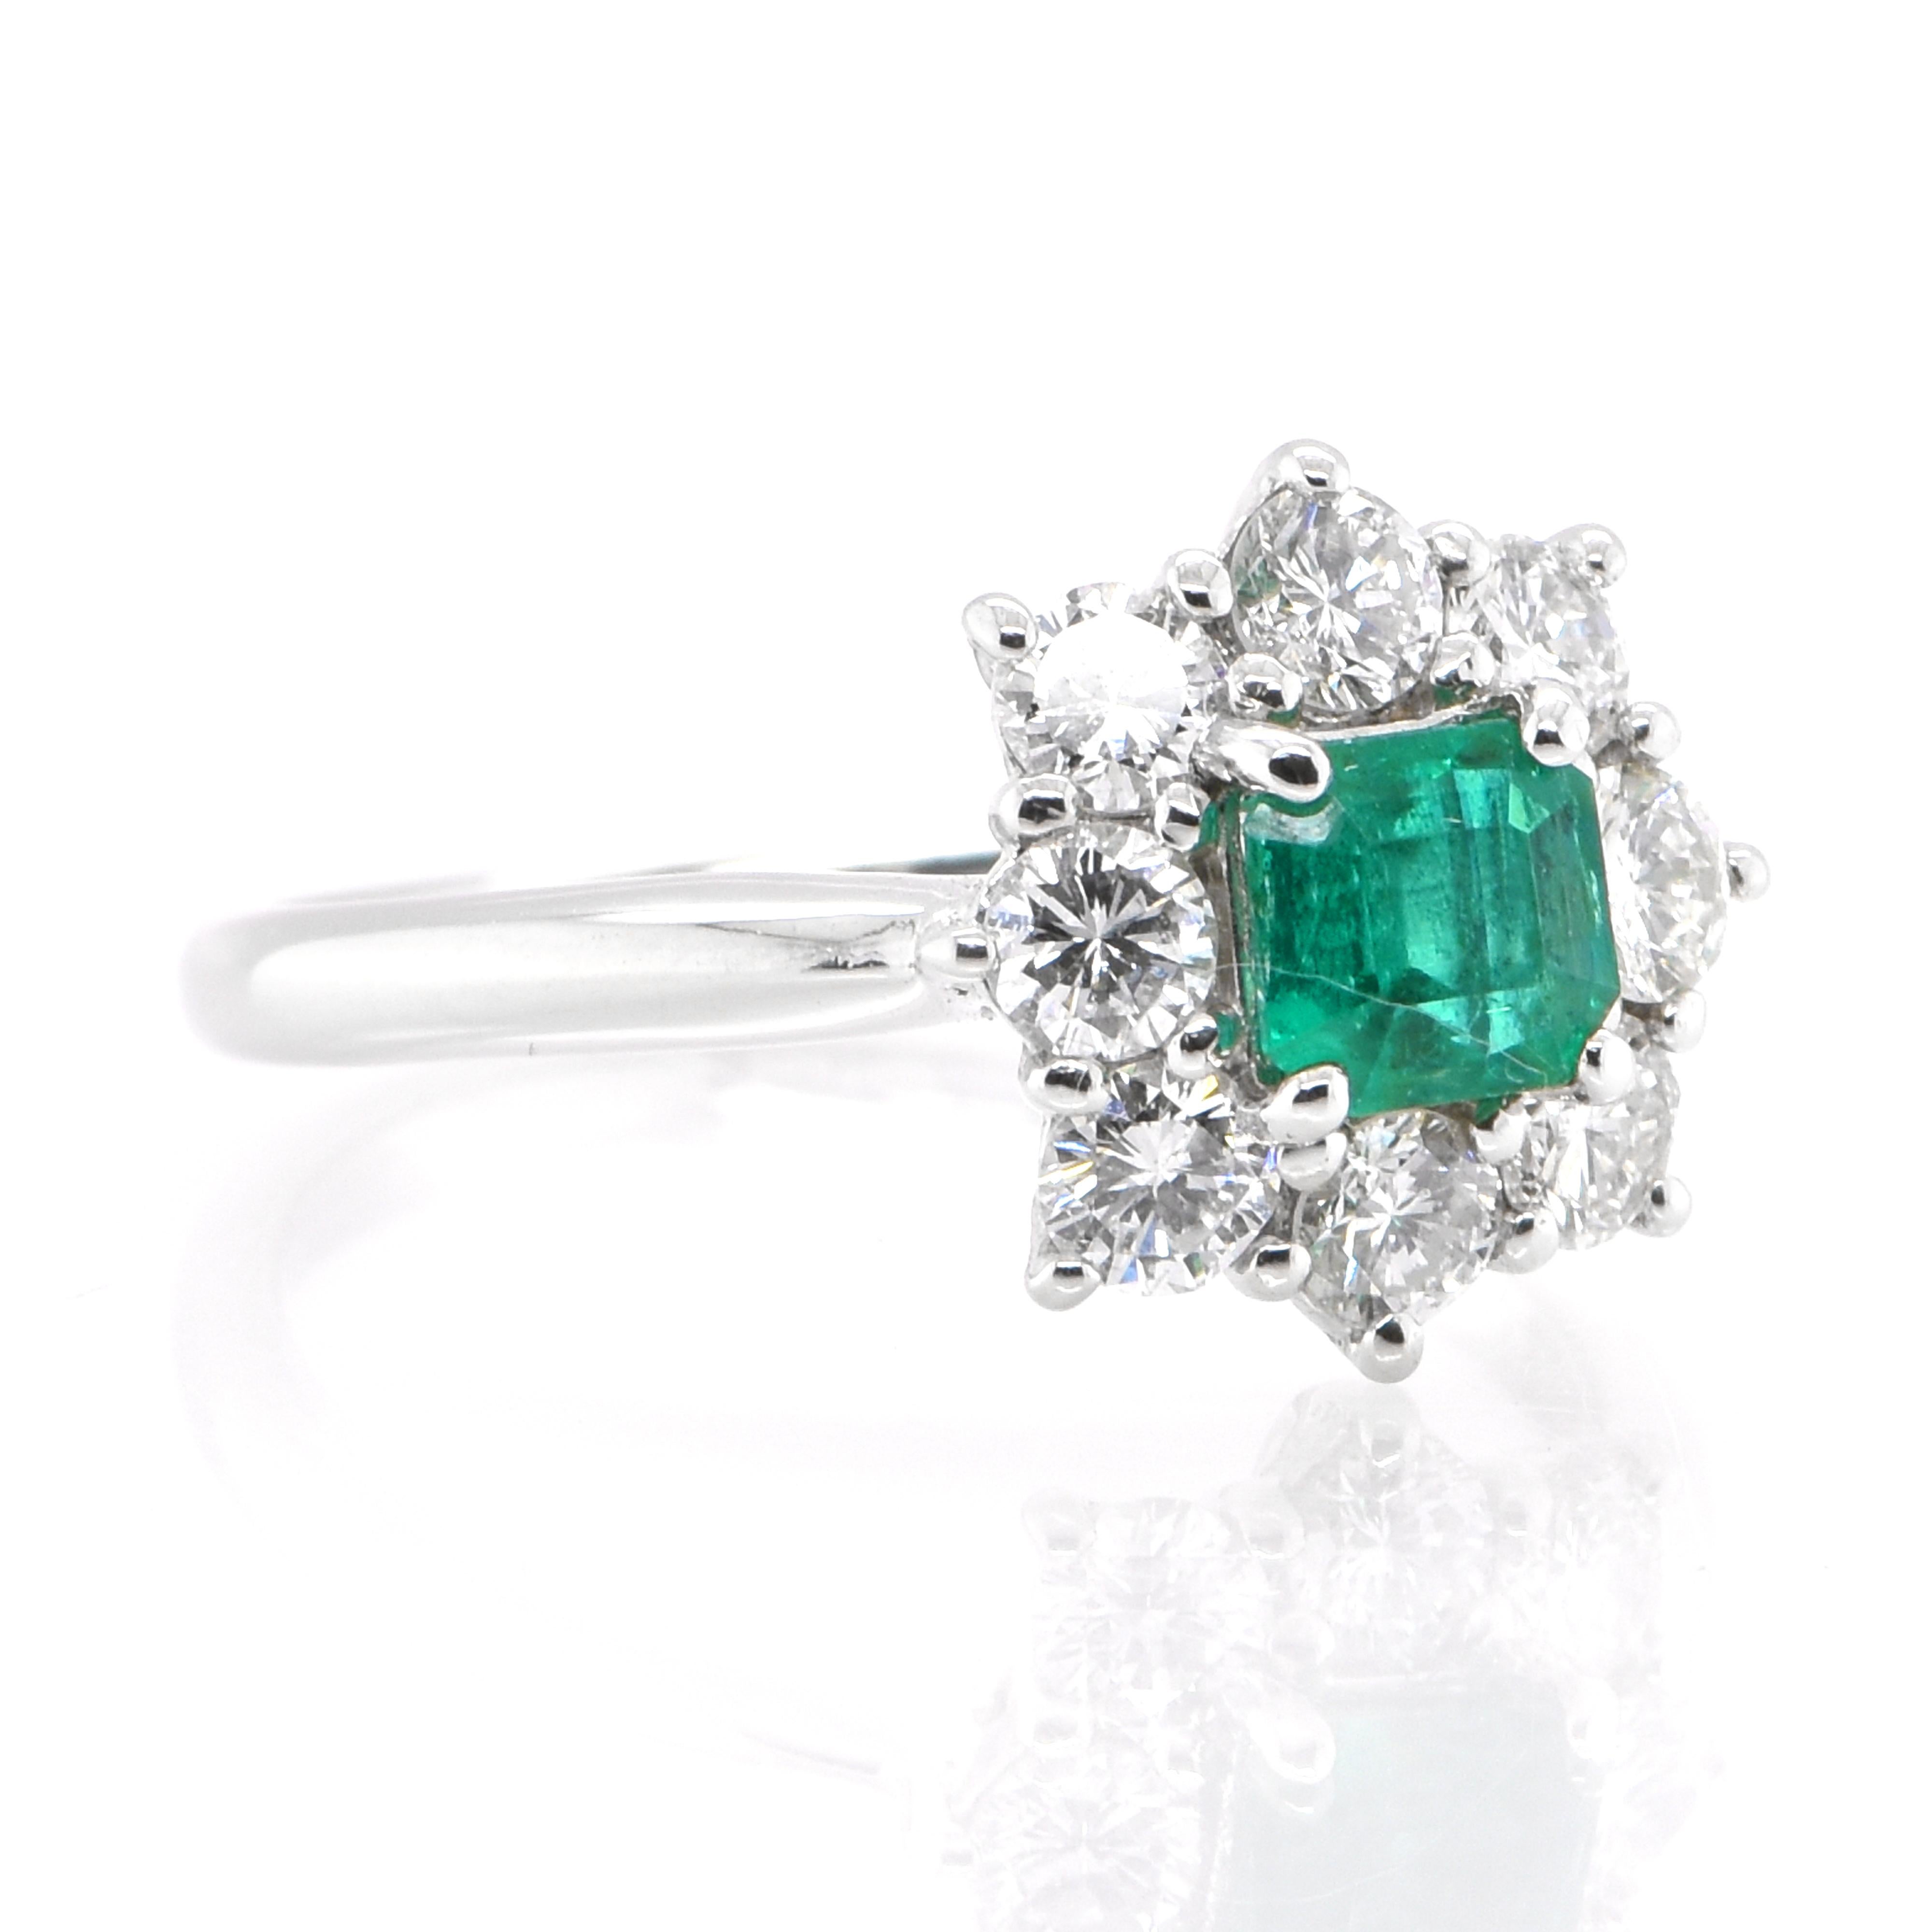 Emerald Cut 0.48 Carat Natural Colombian Emerald and Diamond Ring Set in Platinum For Sale